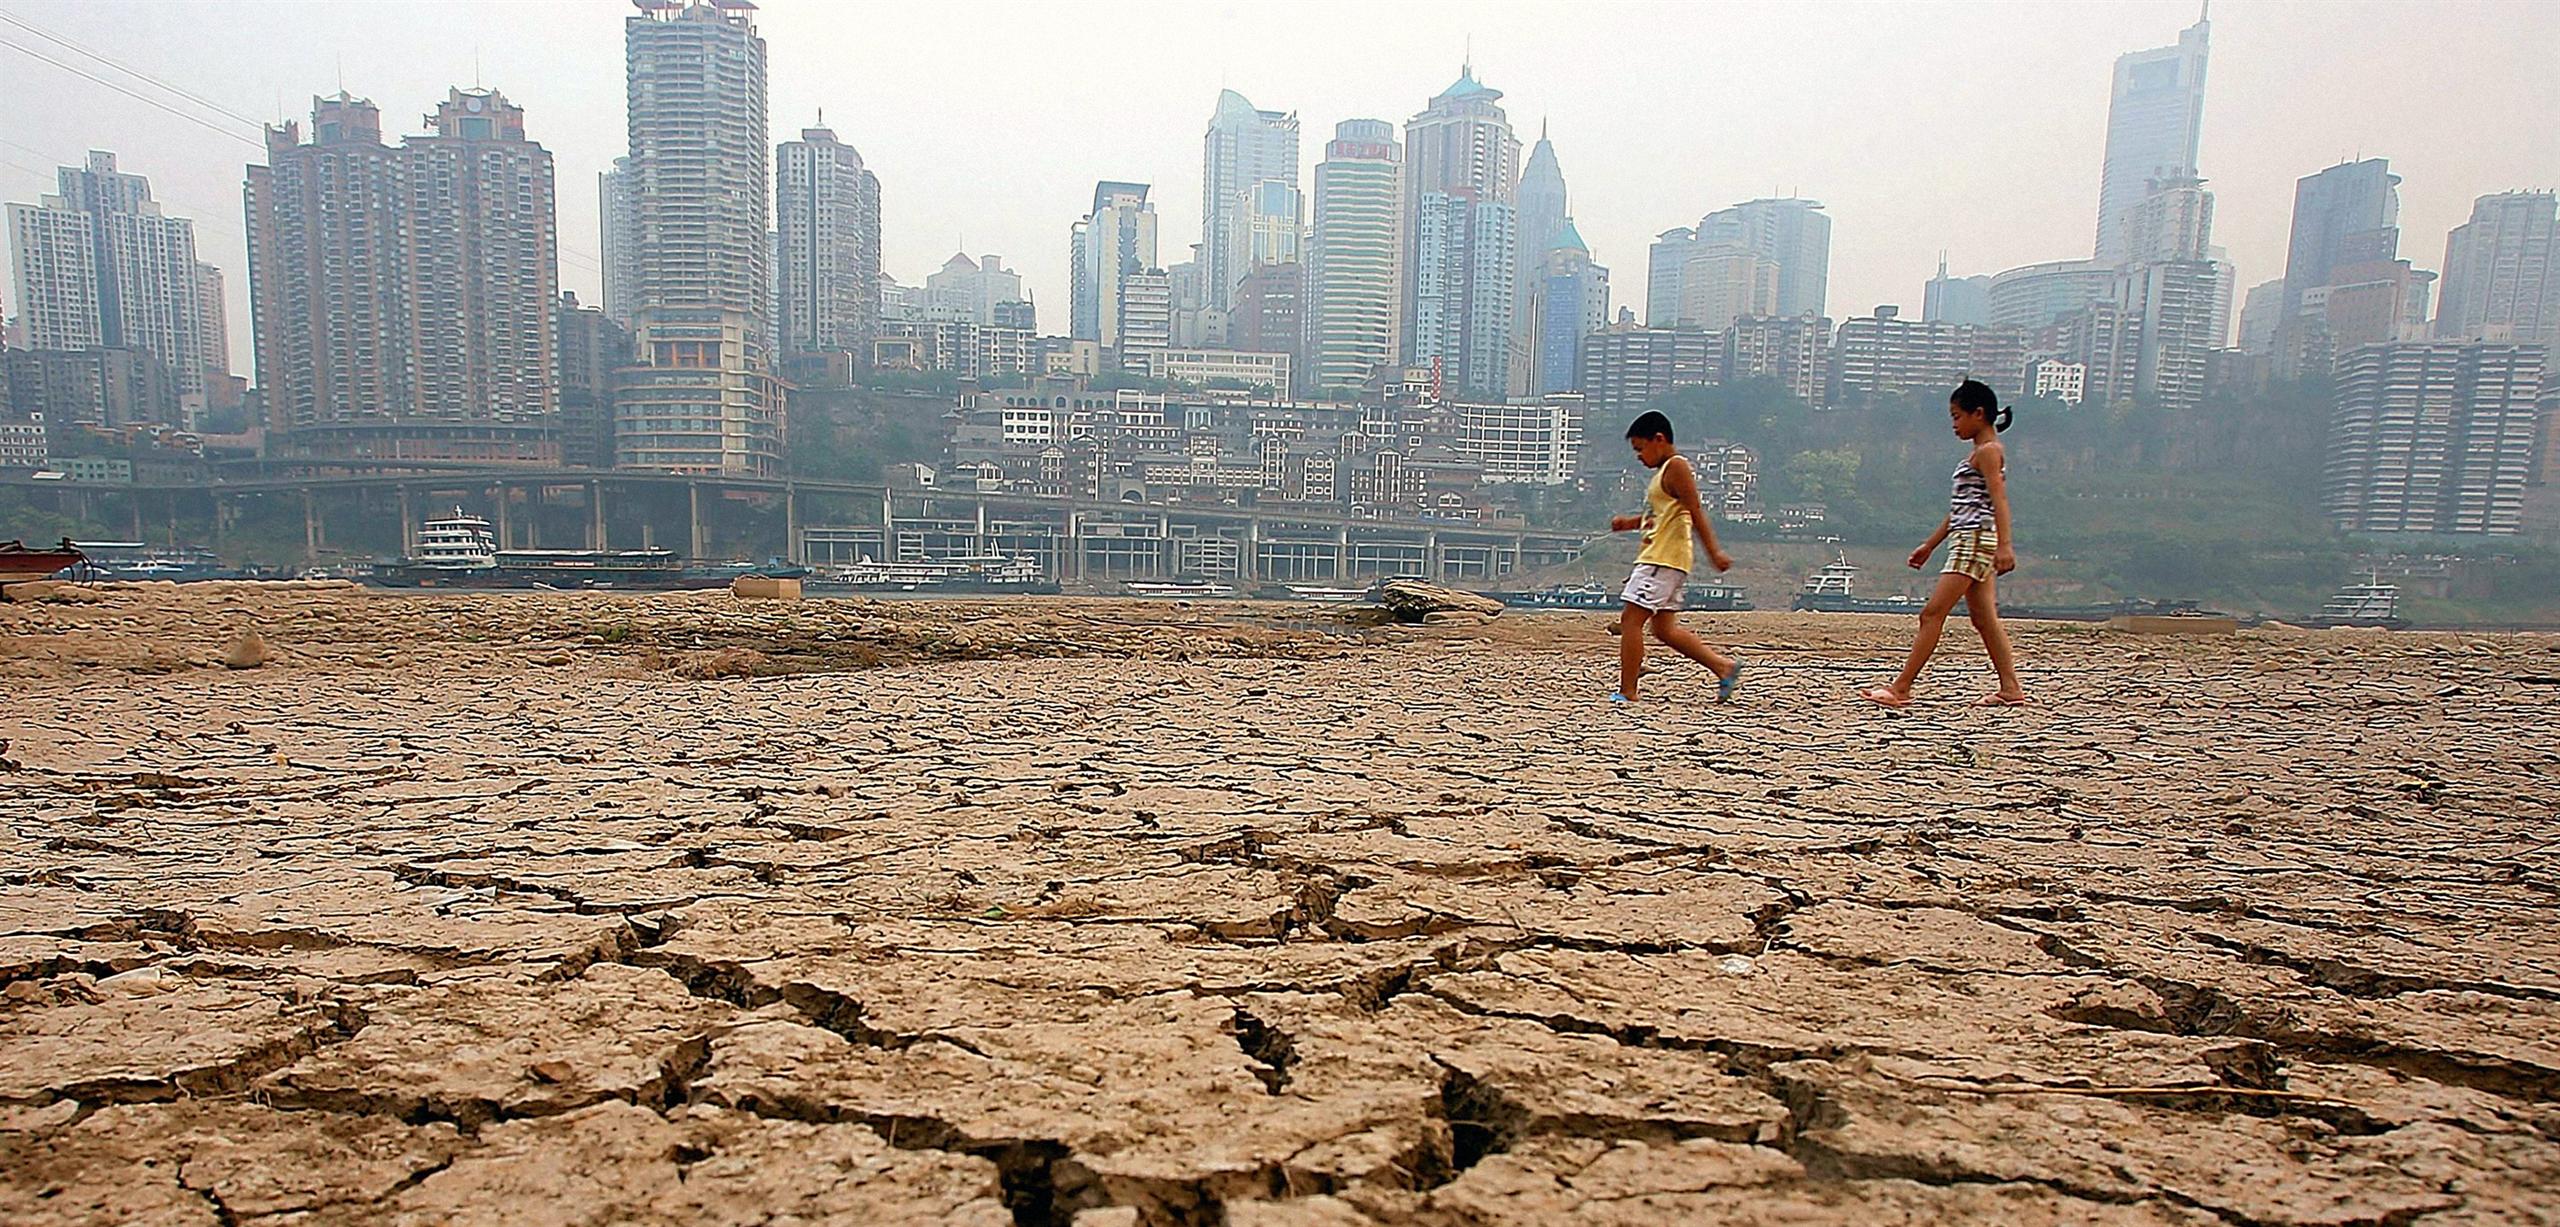 Two young children walking across cracked, dry land with a city skyline behind.